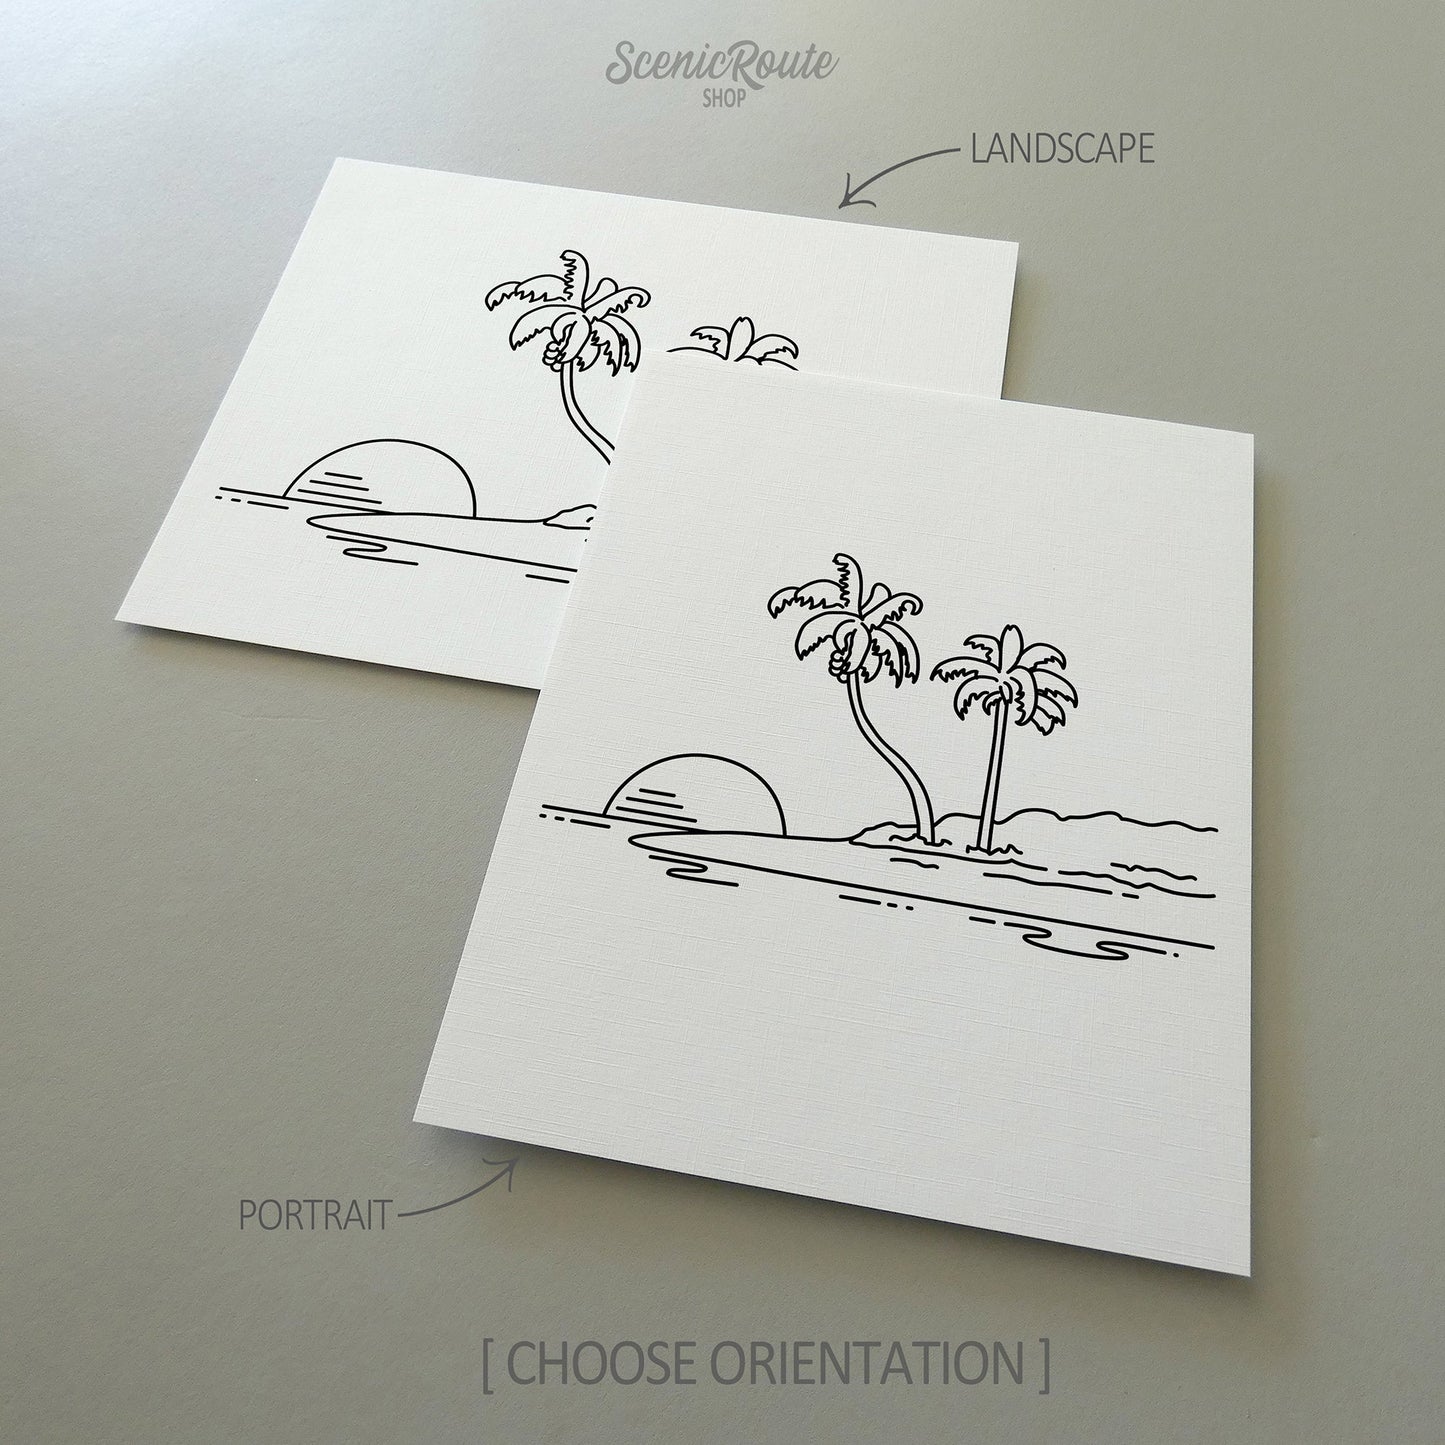 Two line art drawings of An Island on white linen paper with a gray background.  The pieces are shown in portrait and landscape orientation for the available art print options.